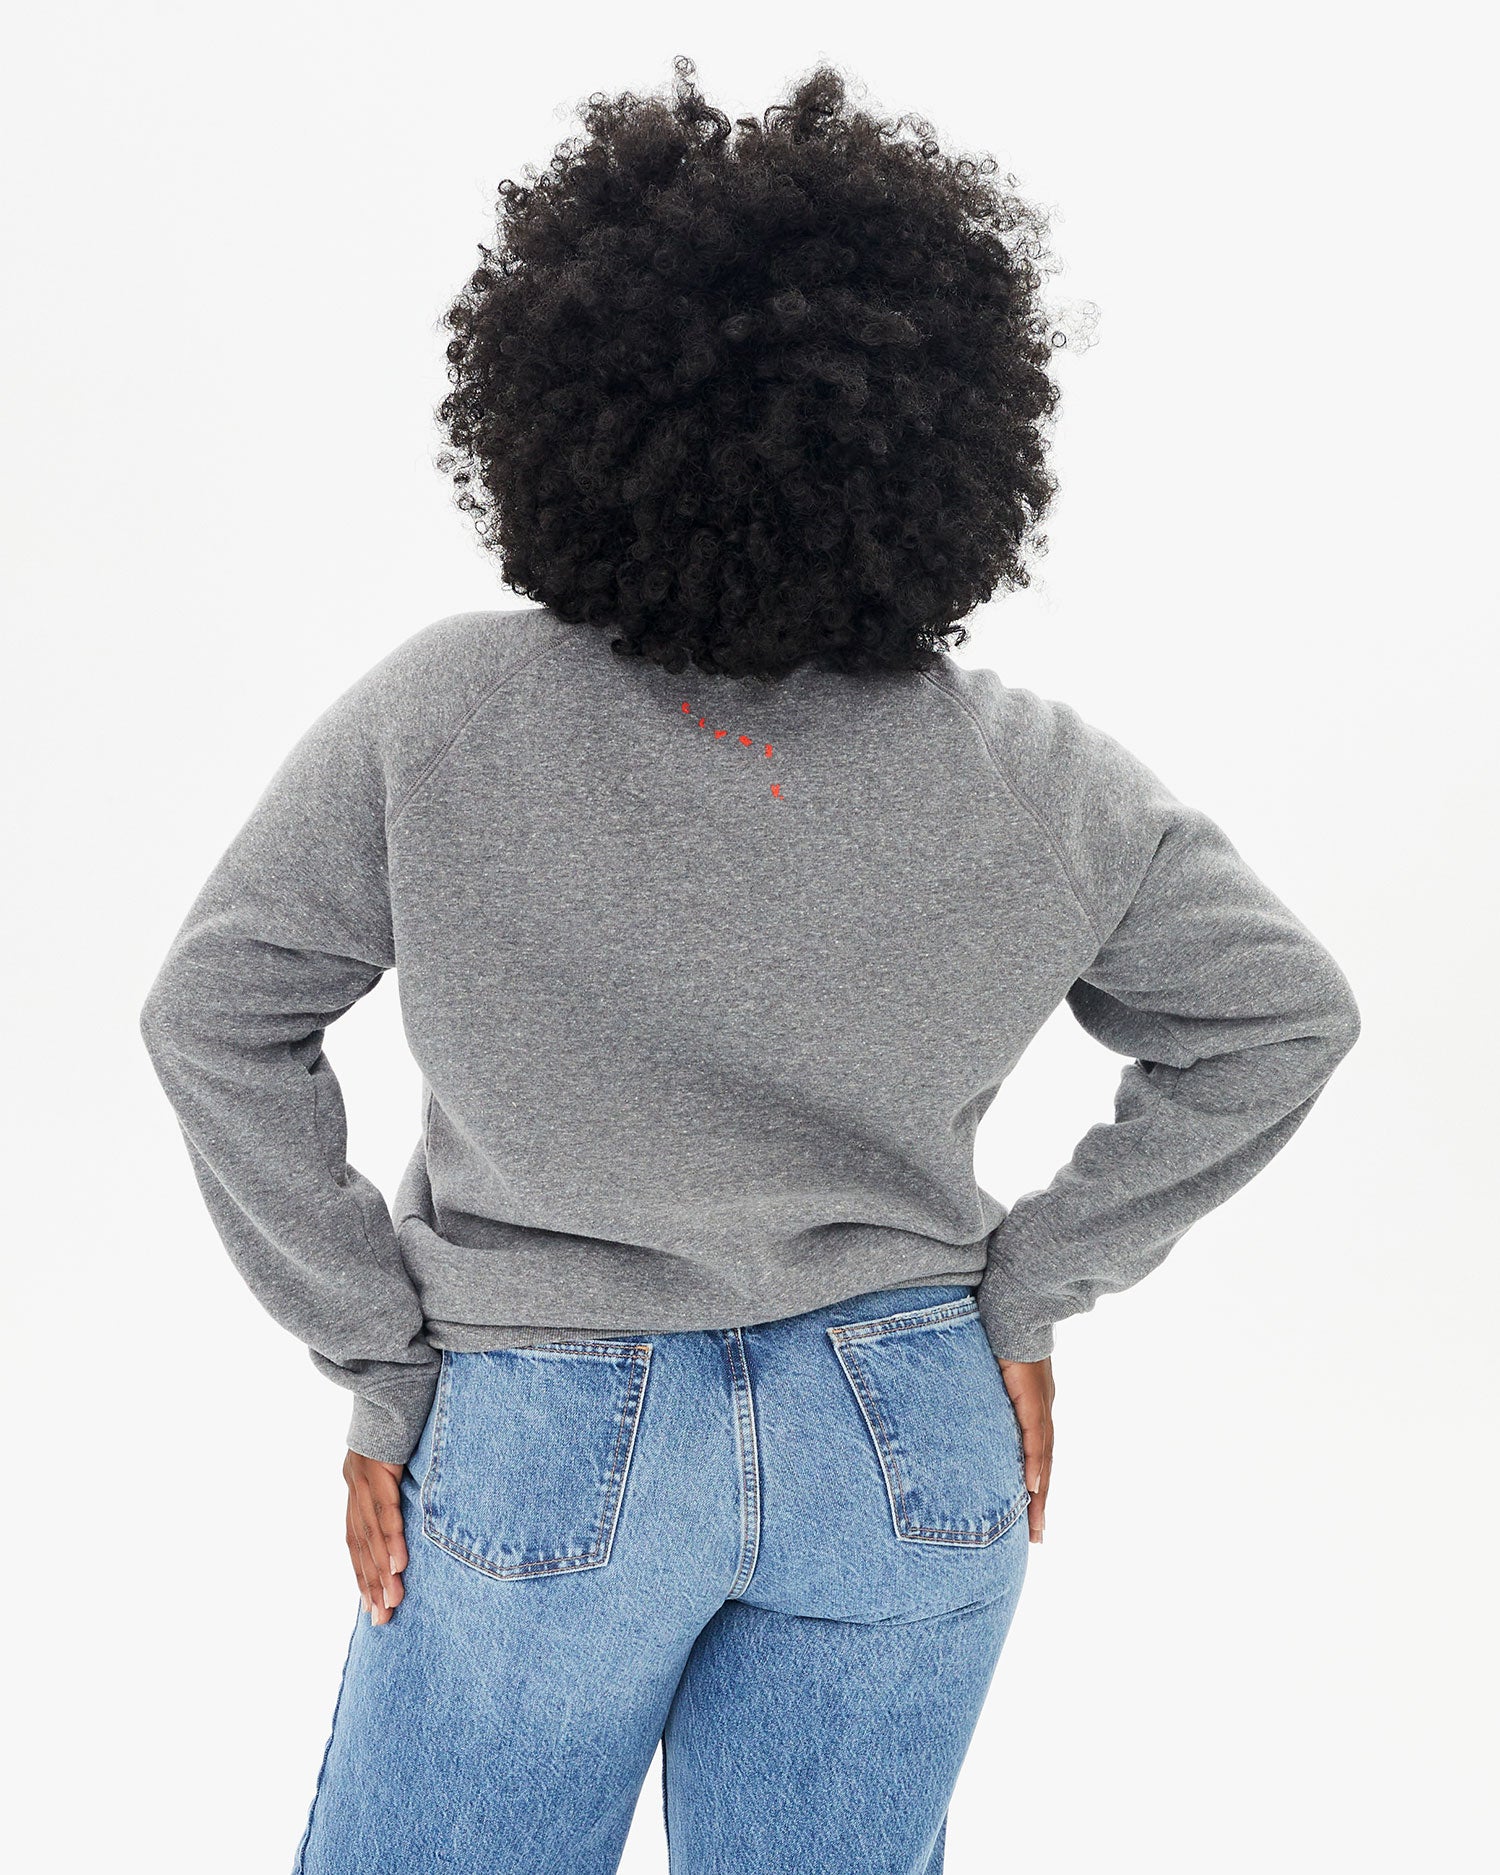 back view of candice in the Heather Grey Oui Sweatshirt with jeans